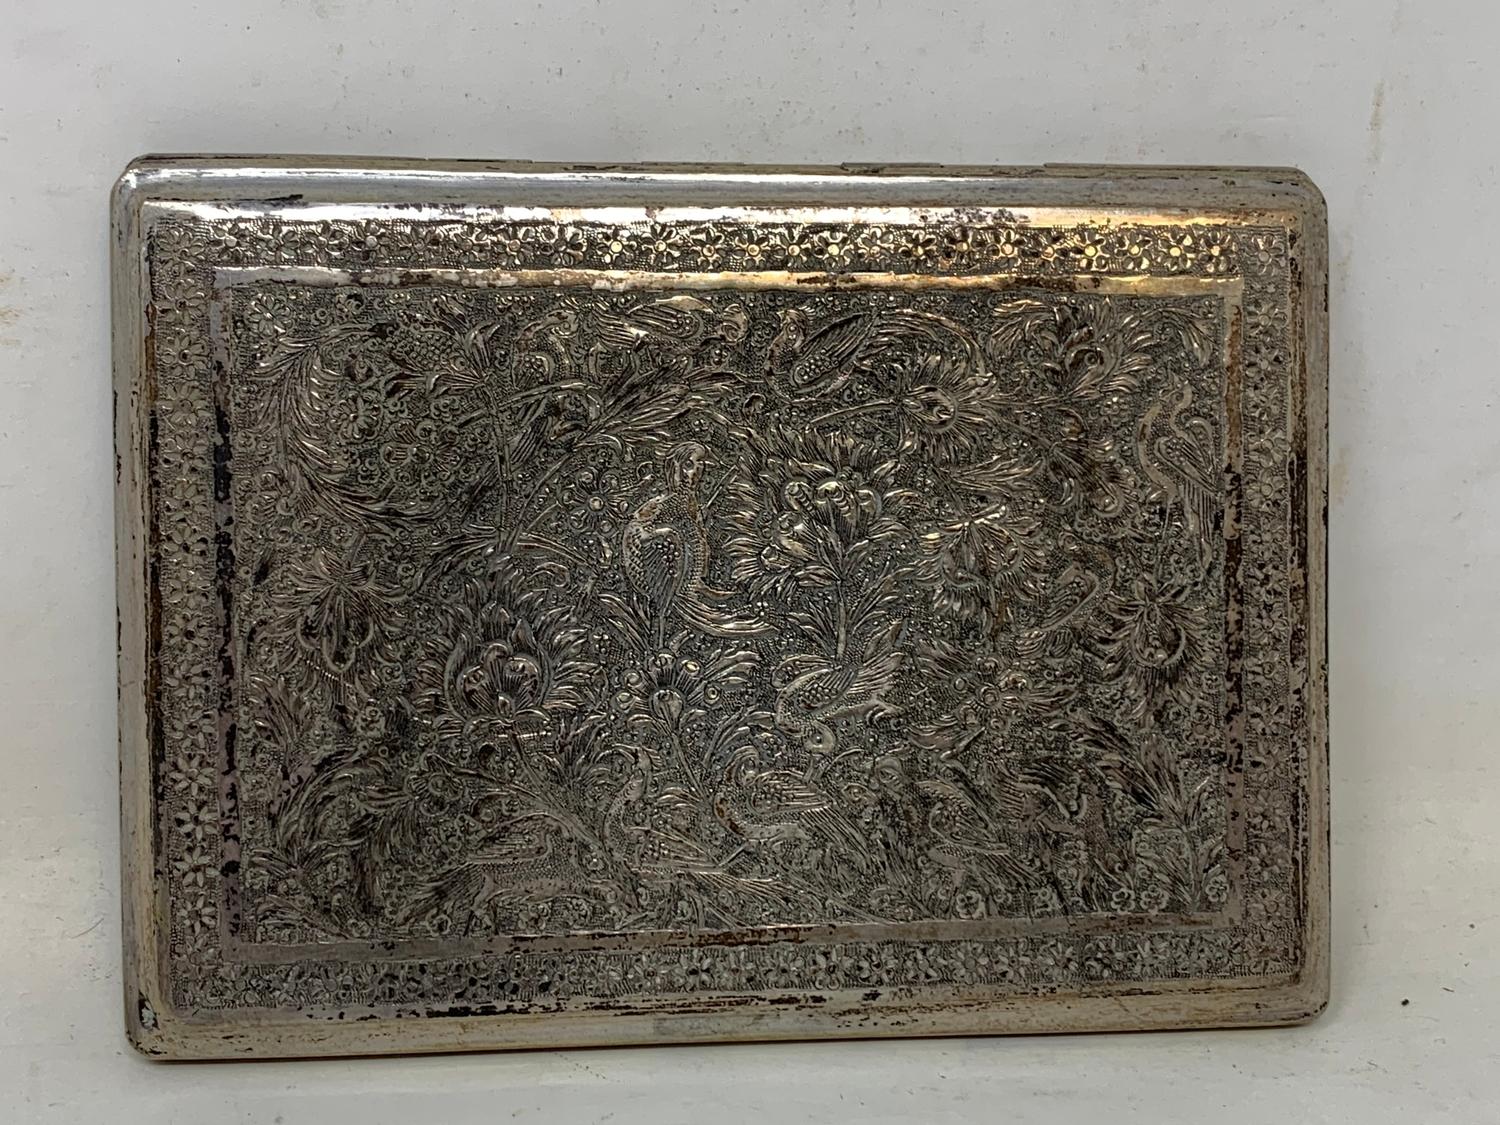 A Persian silver coloured metal cigarette case, decorated birds, flowers and foliage, 11.5 cm wide - Image 5 of 5